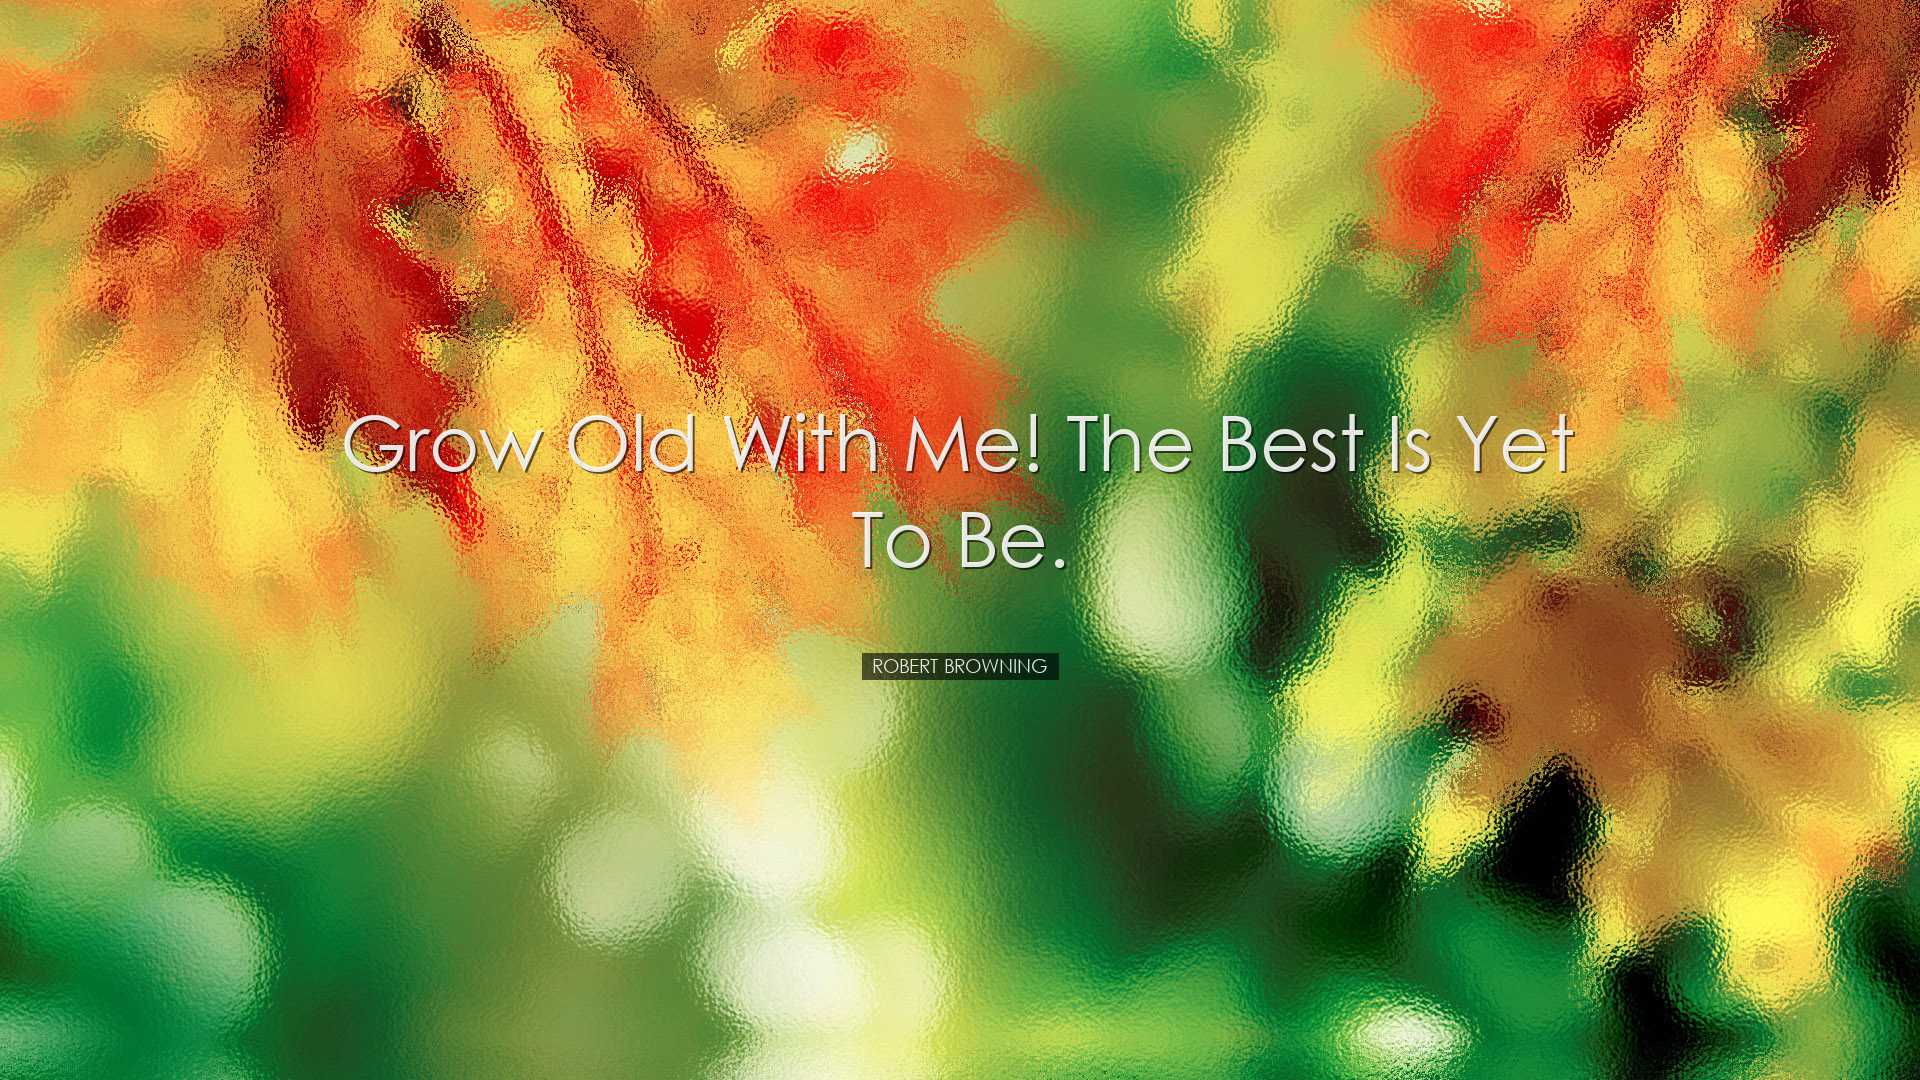 Grow old with me! The best is yet to be. - Robert Browning